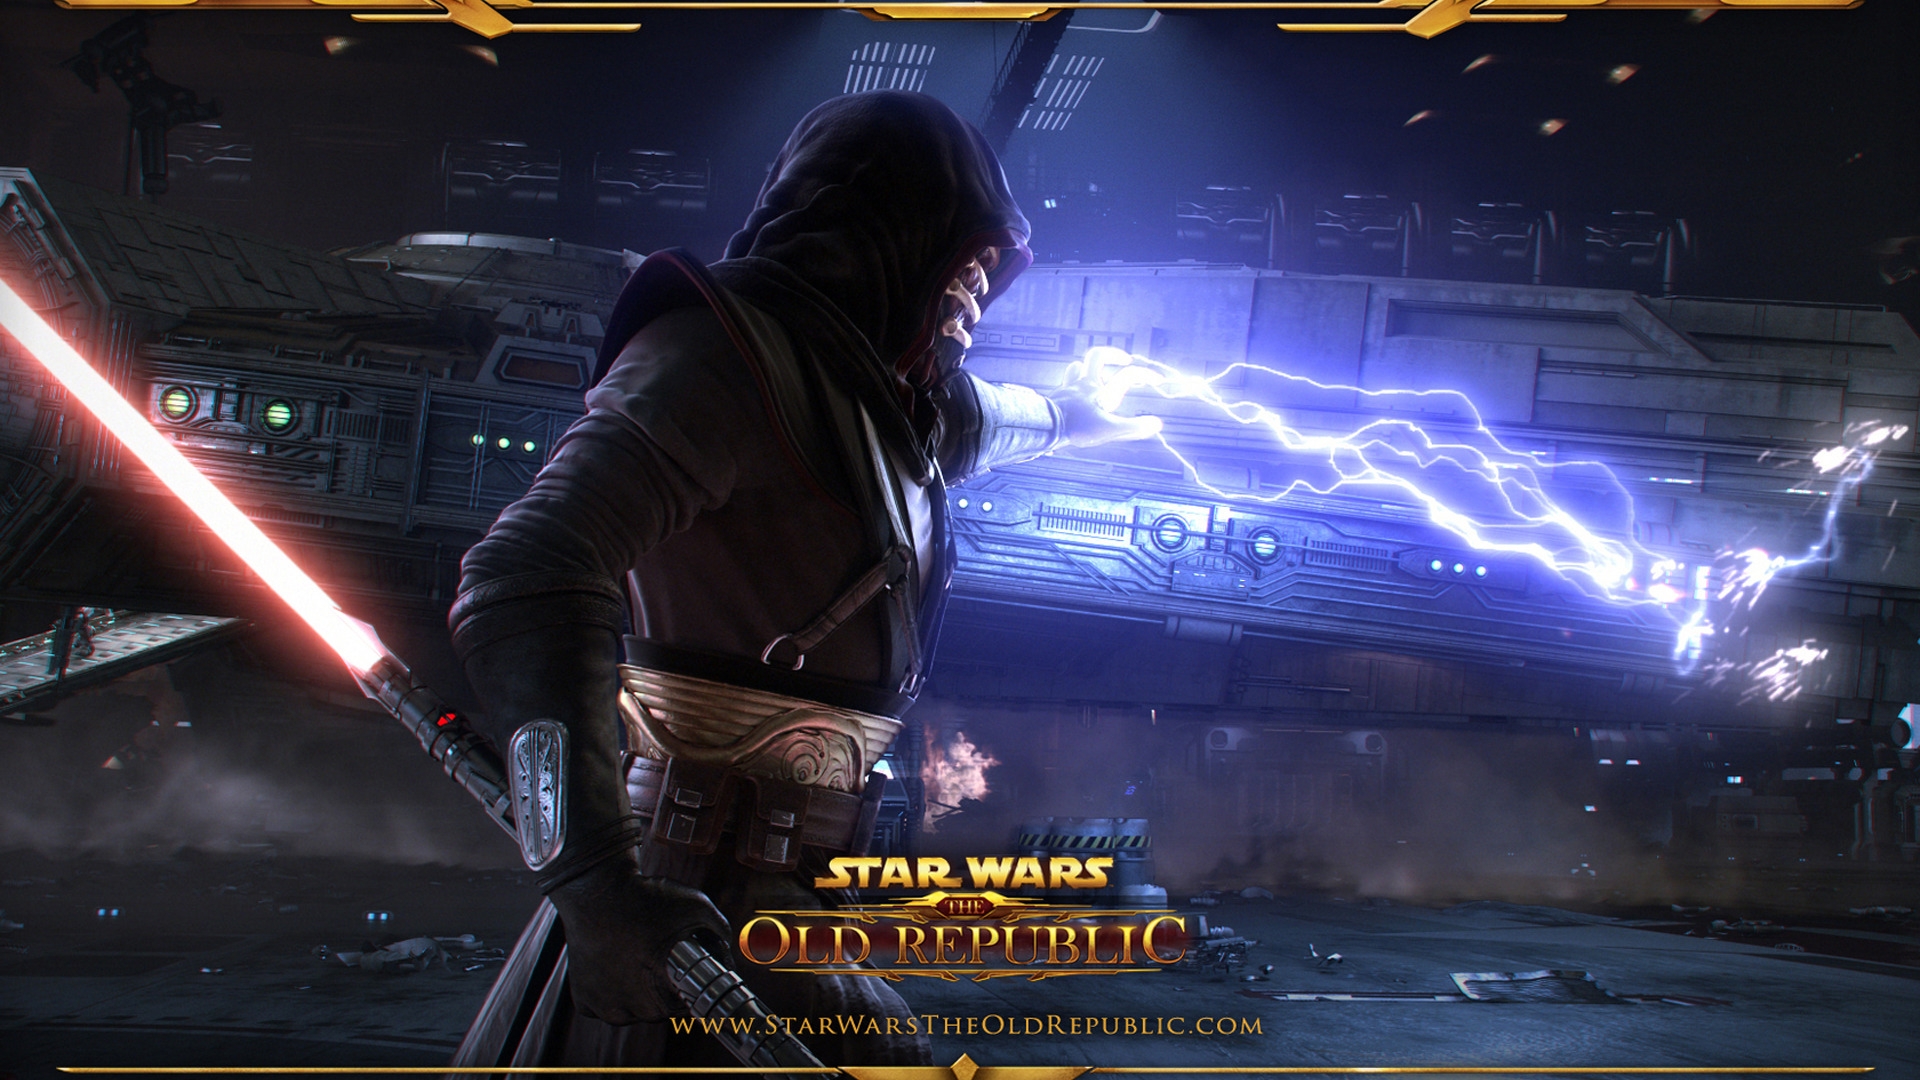 Star Wars The Old Republic for 1920 x 1080 HDTV 1080p resolution